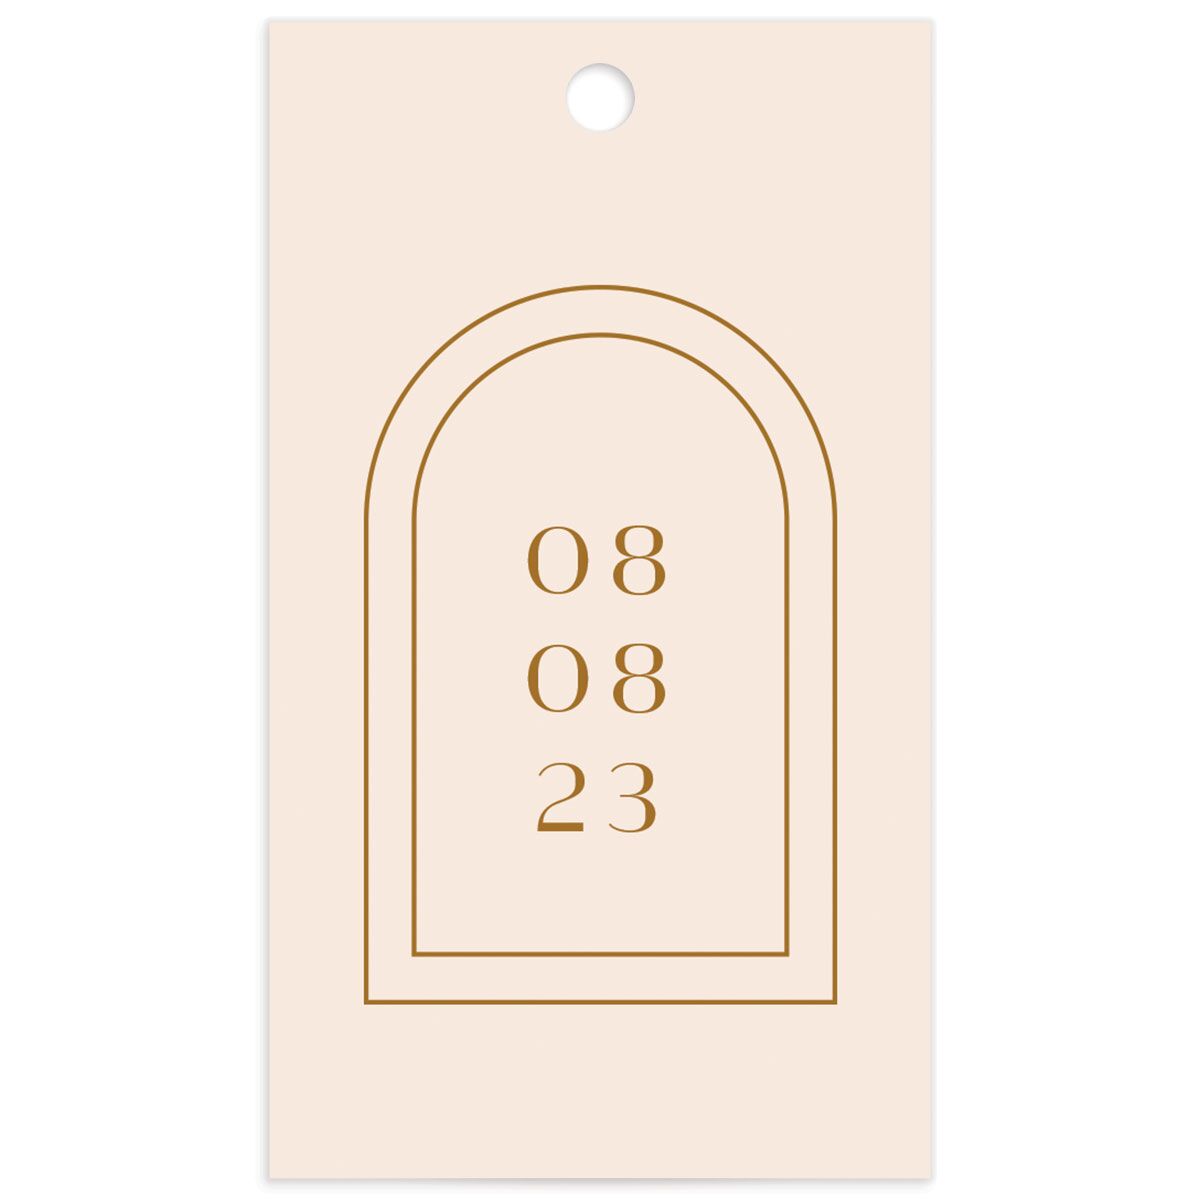 Art Deco Accents Favor Gift Tags back in brown